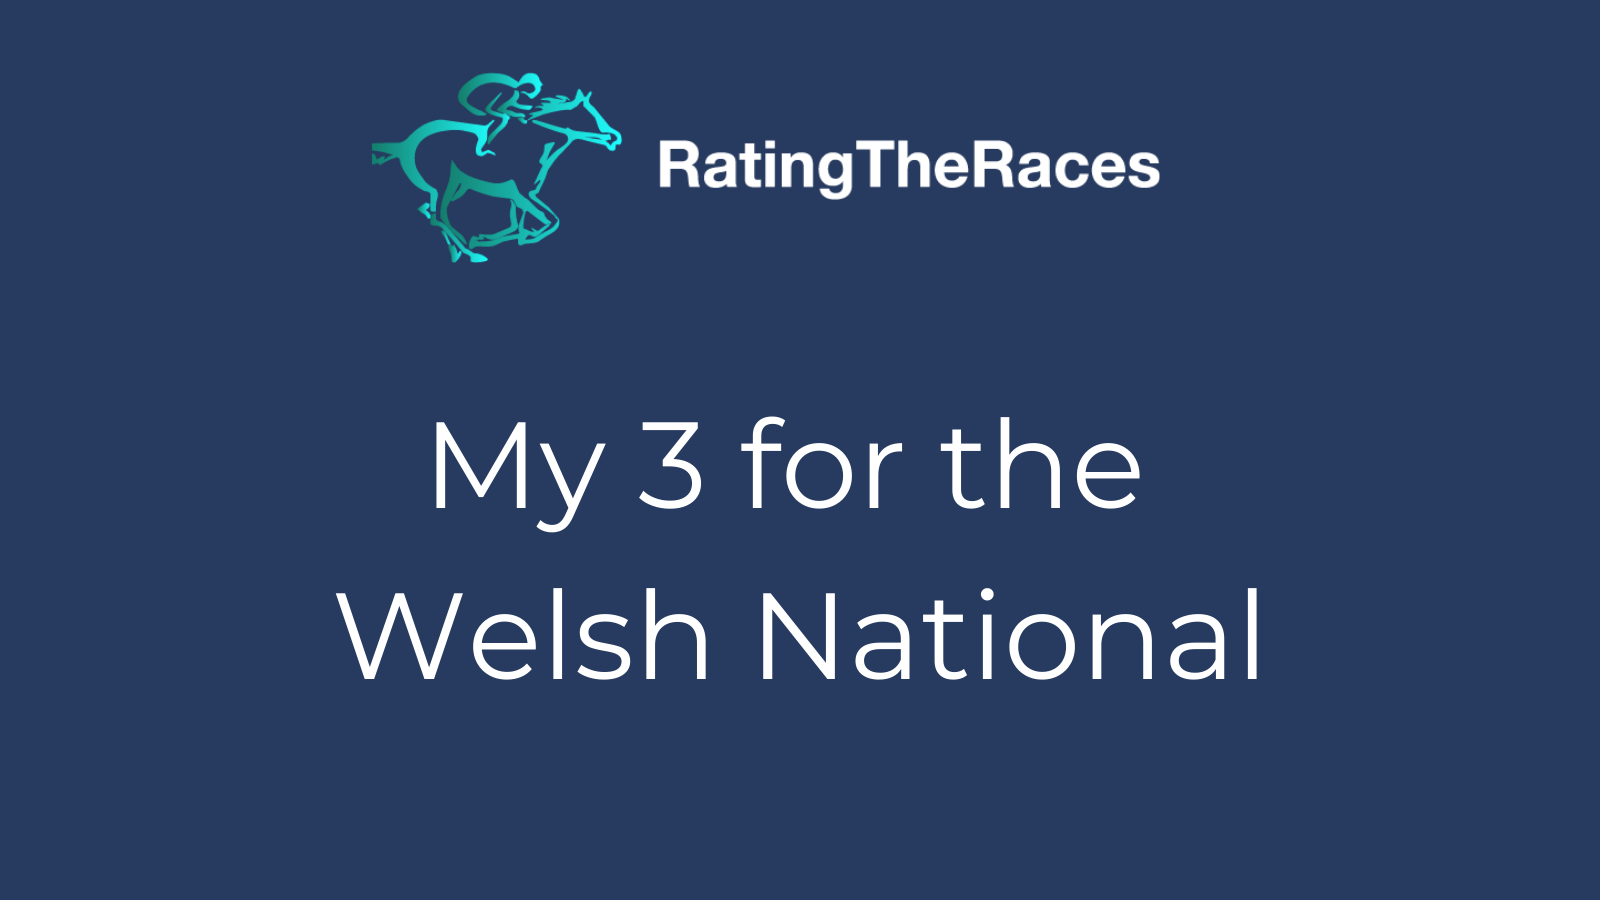 3 for the Welsh National